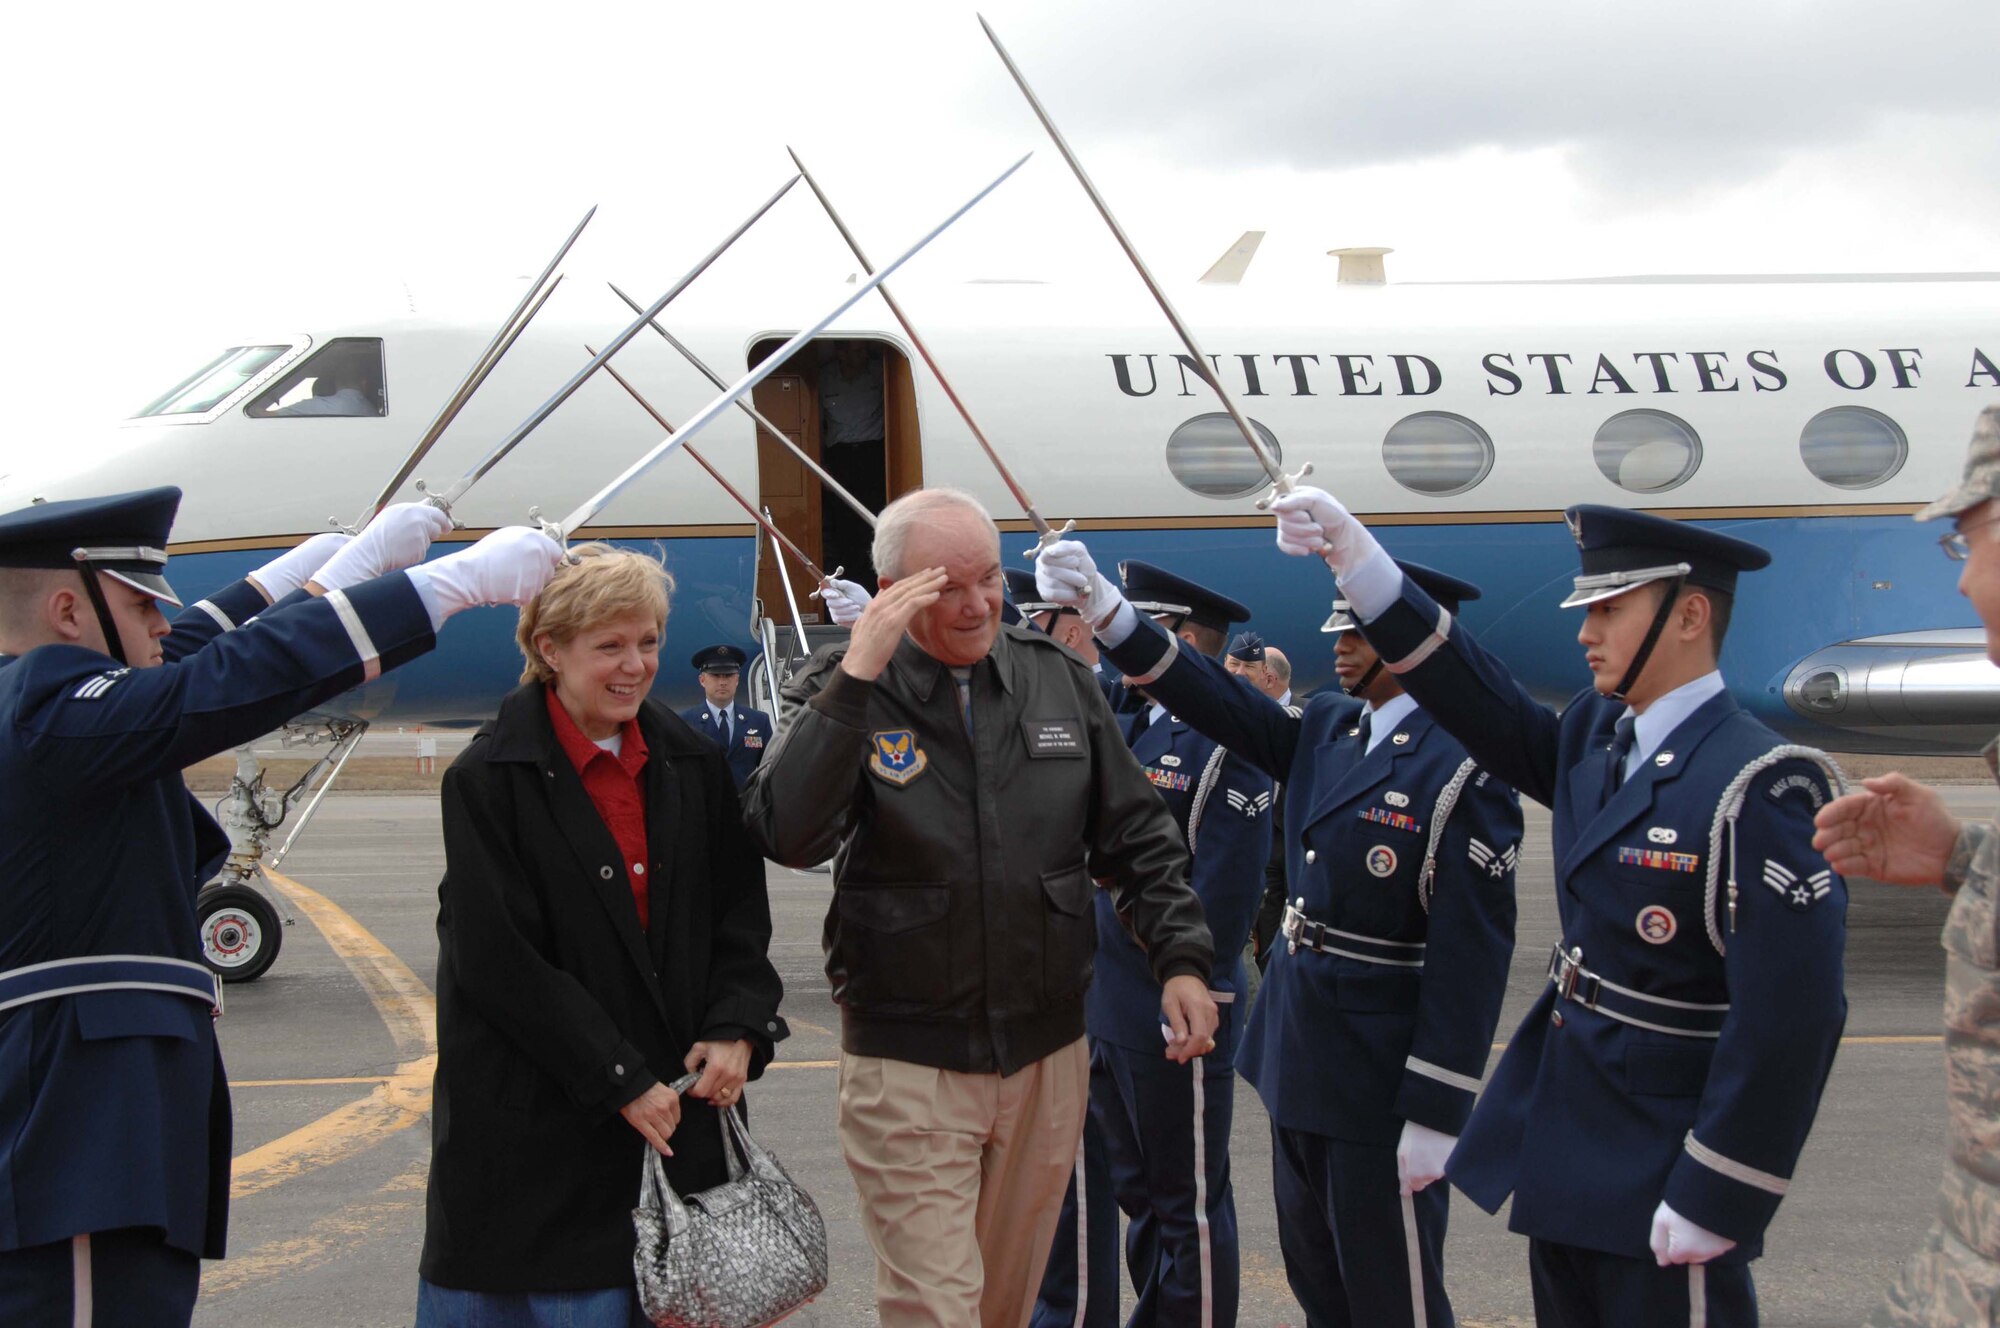 EIELSON AIR FORCE BASE, Alaska -- Secretary of the Air Force Michael W. Wynne arrives at Eielson AFB, AK. on May 08. The 21st Secretary of the Air Force is currently touring the Pacific Region to introduce his top priorities for the Air Force -- winning the war on terrorism, Fostering mutual integrity and respect, and revitalizing for the service's aging infrastructure and fleet.  (U.S. Air Force photo taken by Staff Sergeant Tia C. Schroeder) 